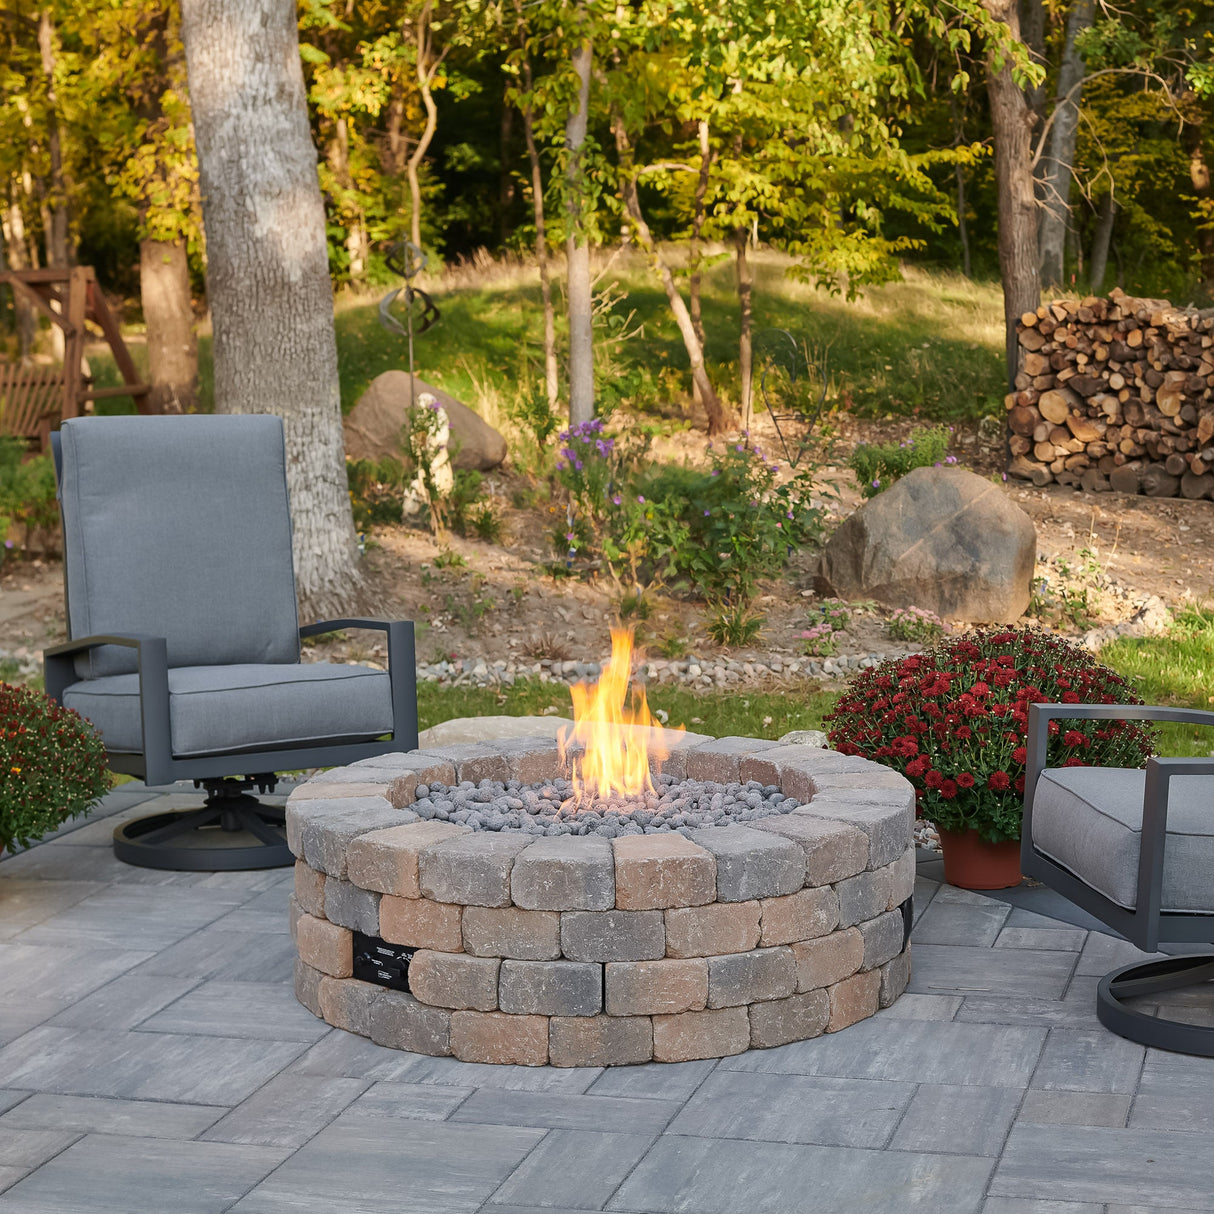 The Bronson Block Round Gas Fire Pit Kit surrounded by patio furniture and a forest background